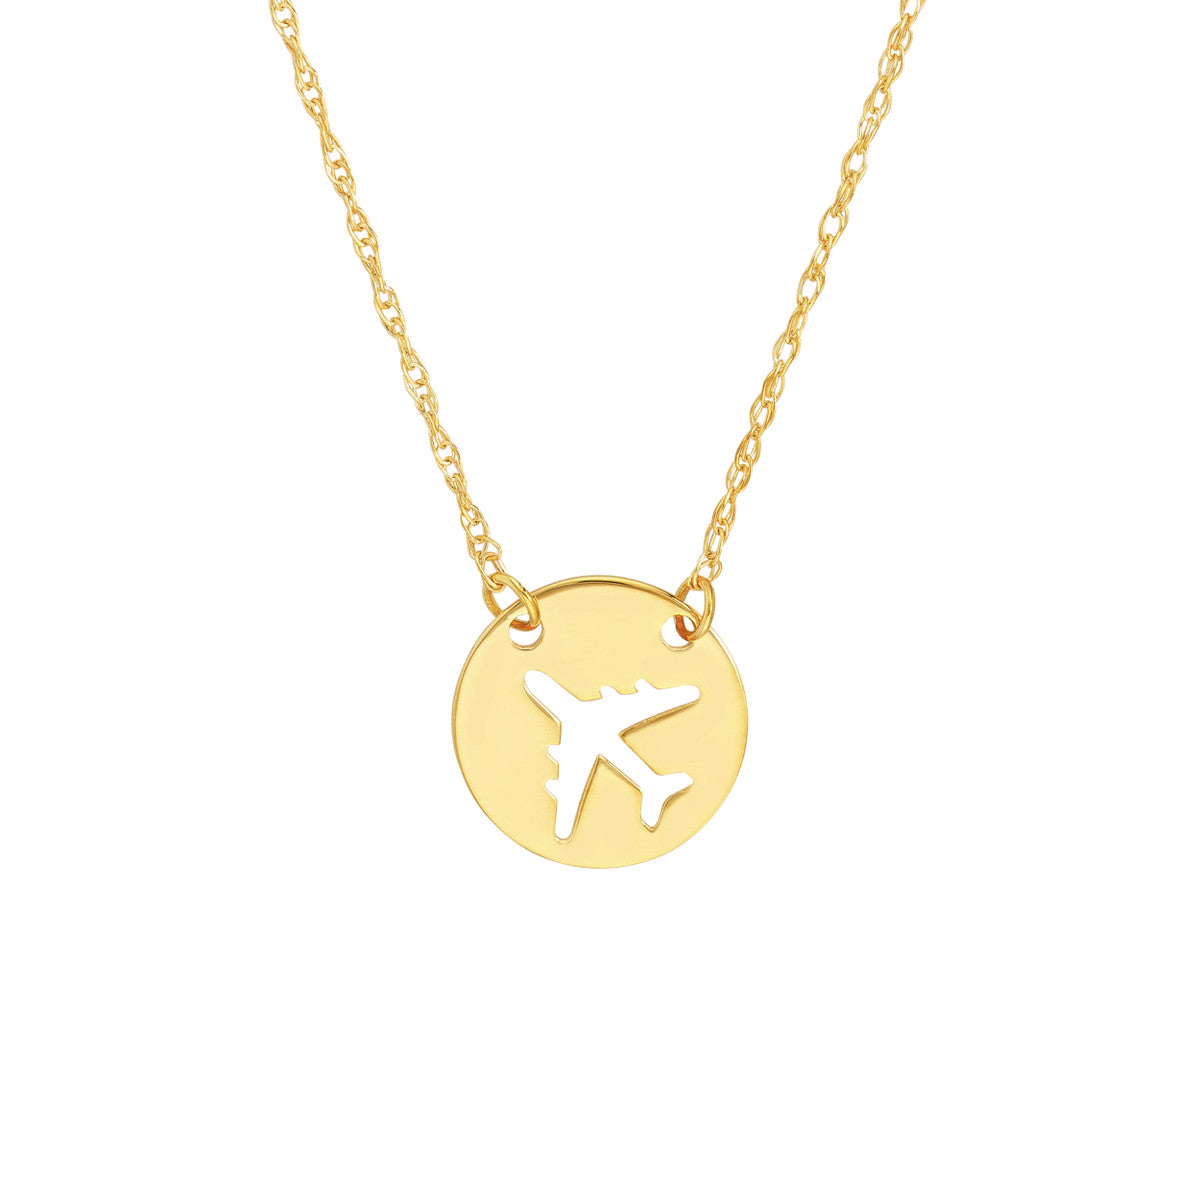 So You Cutout Airplane Mini Disc Adjustable Necklace